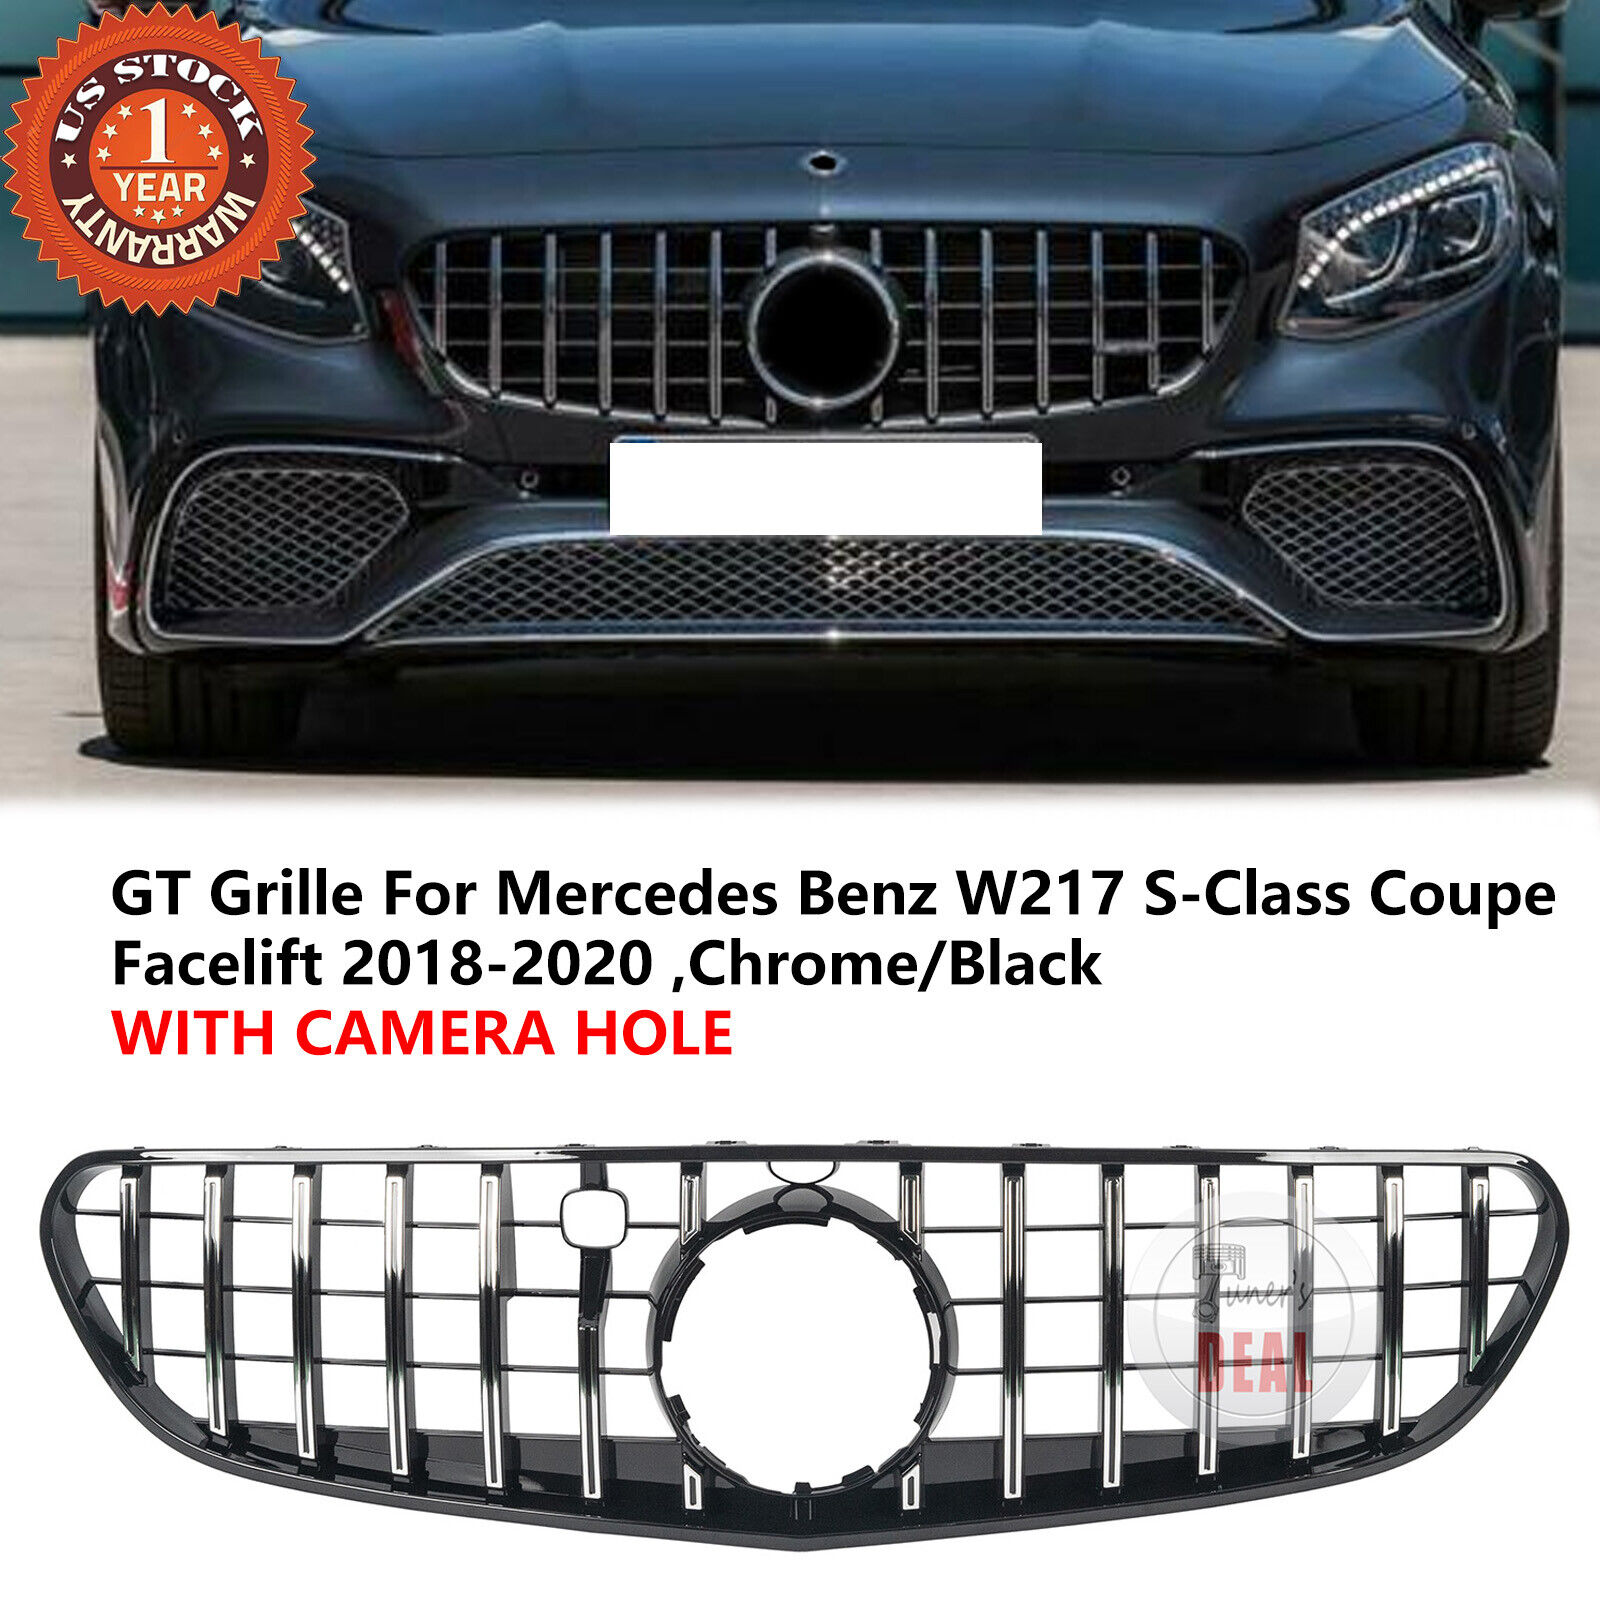 Chrome+Black GT-R Grille For Mercedes-Benz W217 S-Class Coupe 2018-2020